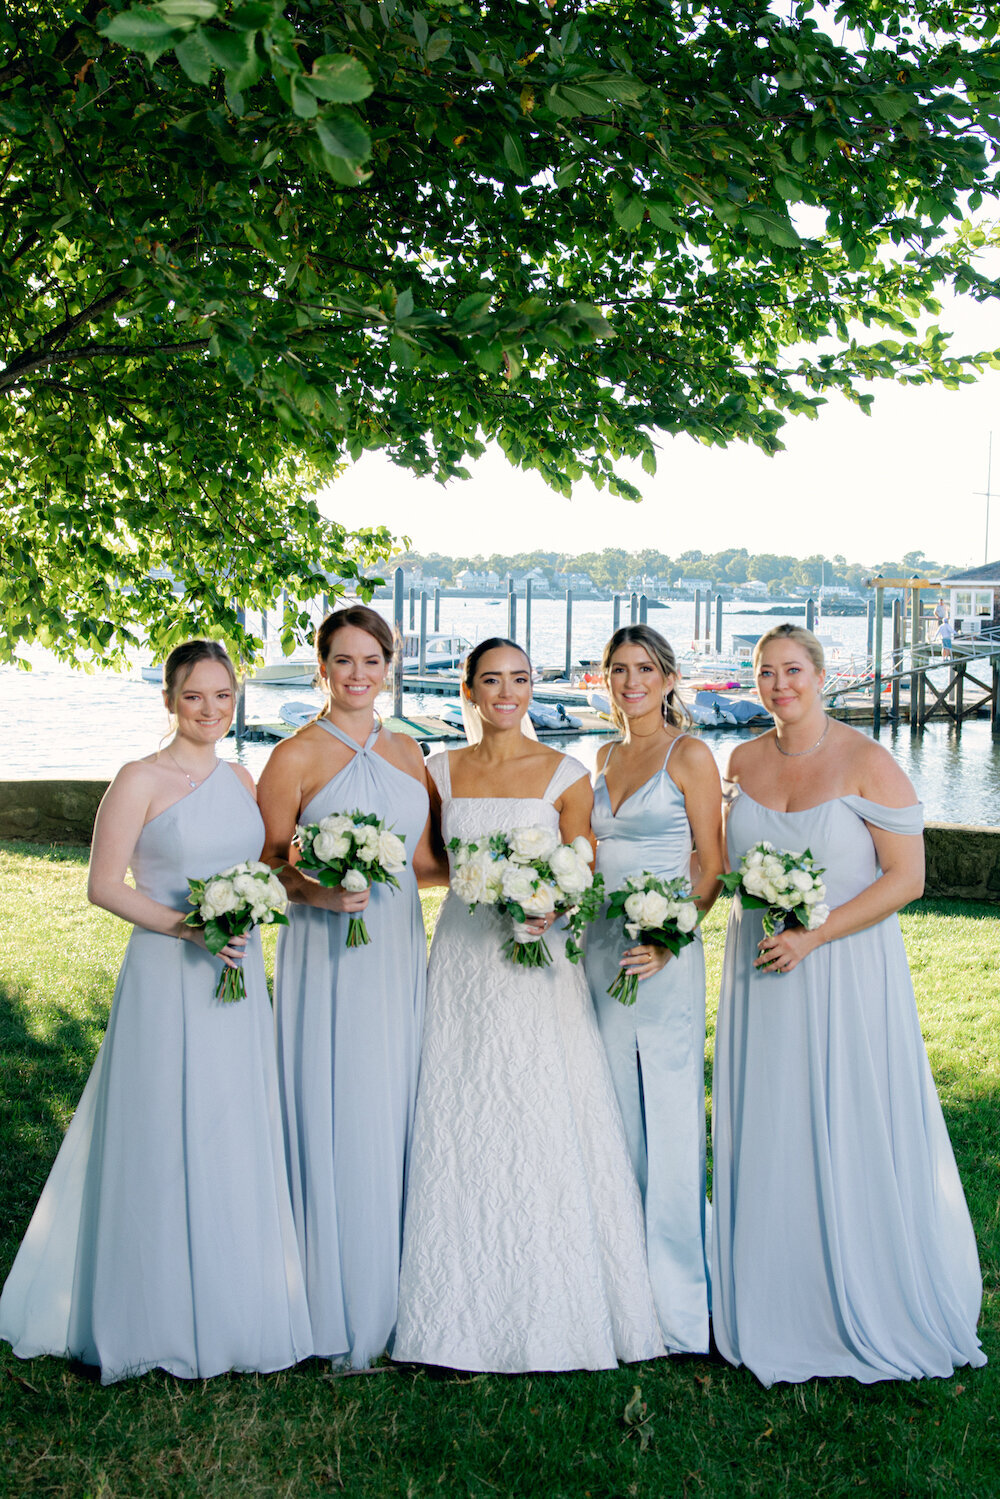 bridal-party-bridesmaids-wedding-lela-rose-clermont-melrose-plumed-serpent-stamford-yacht-club